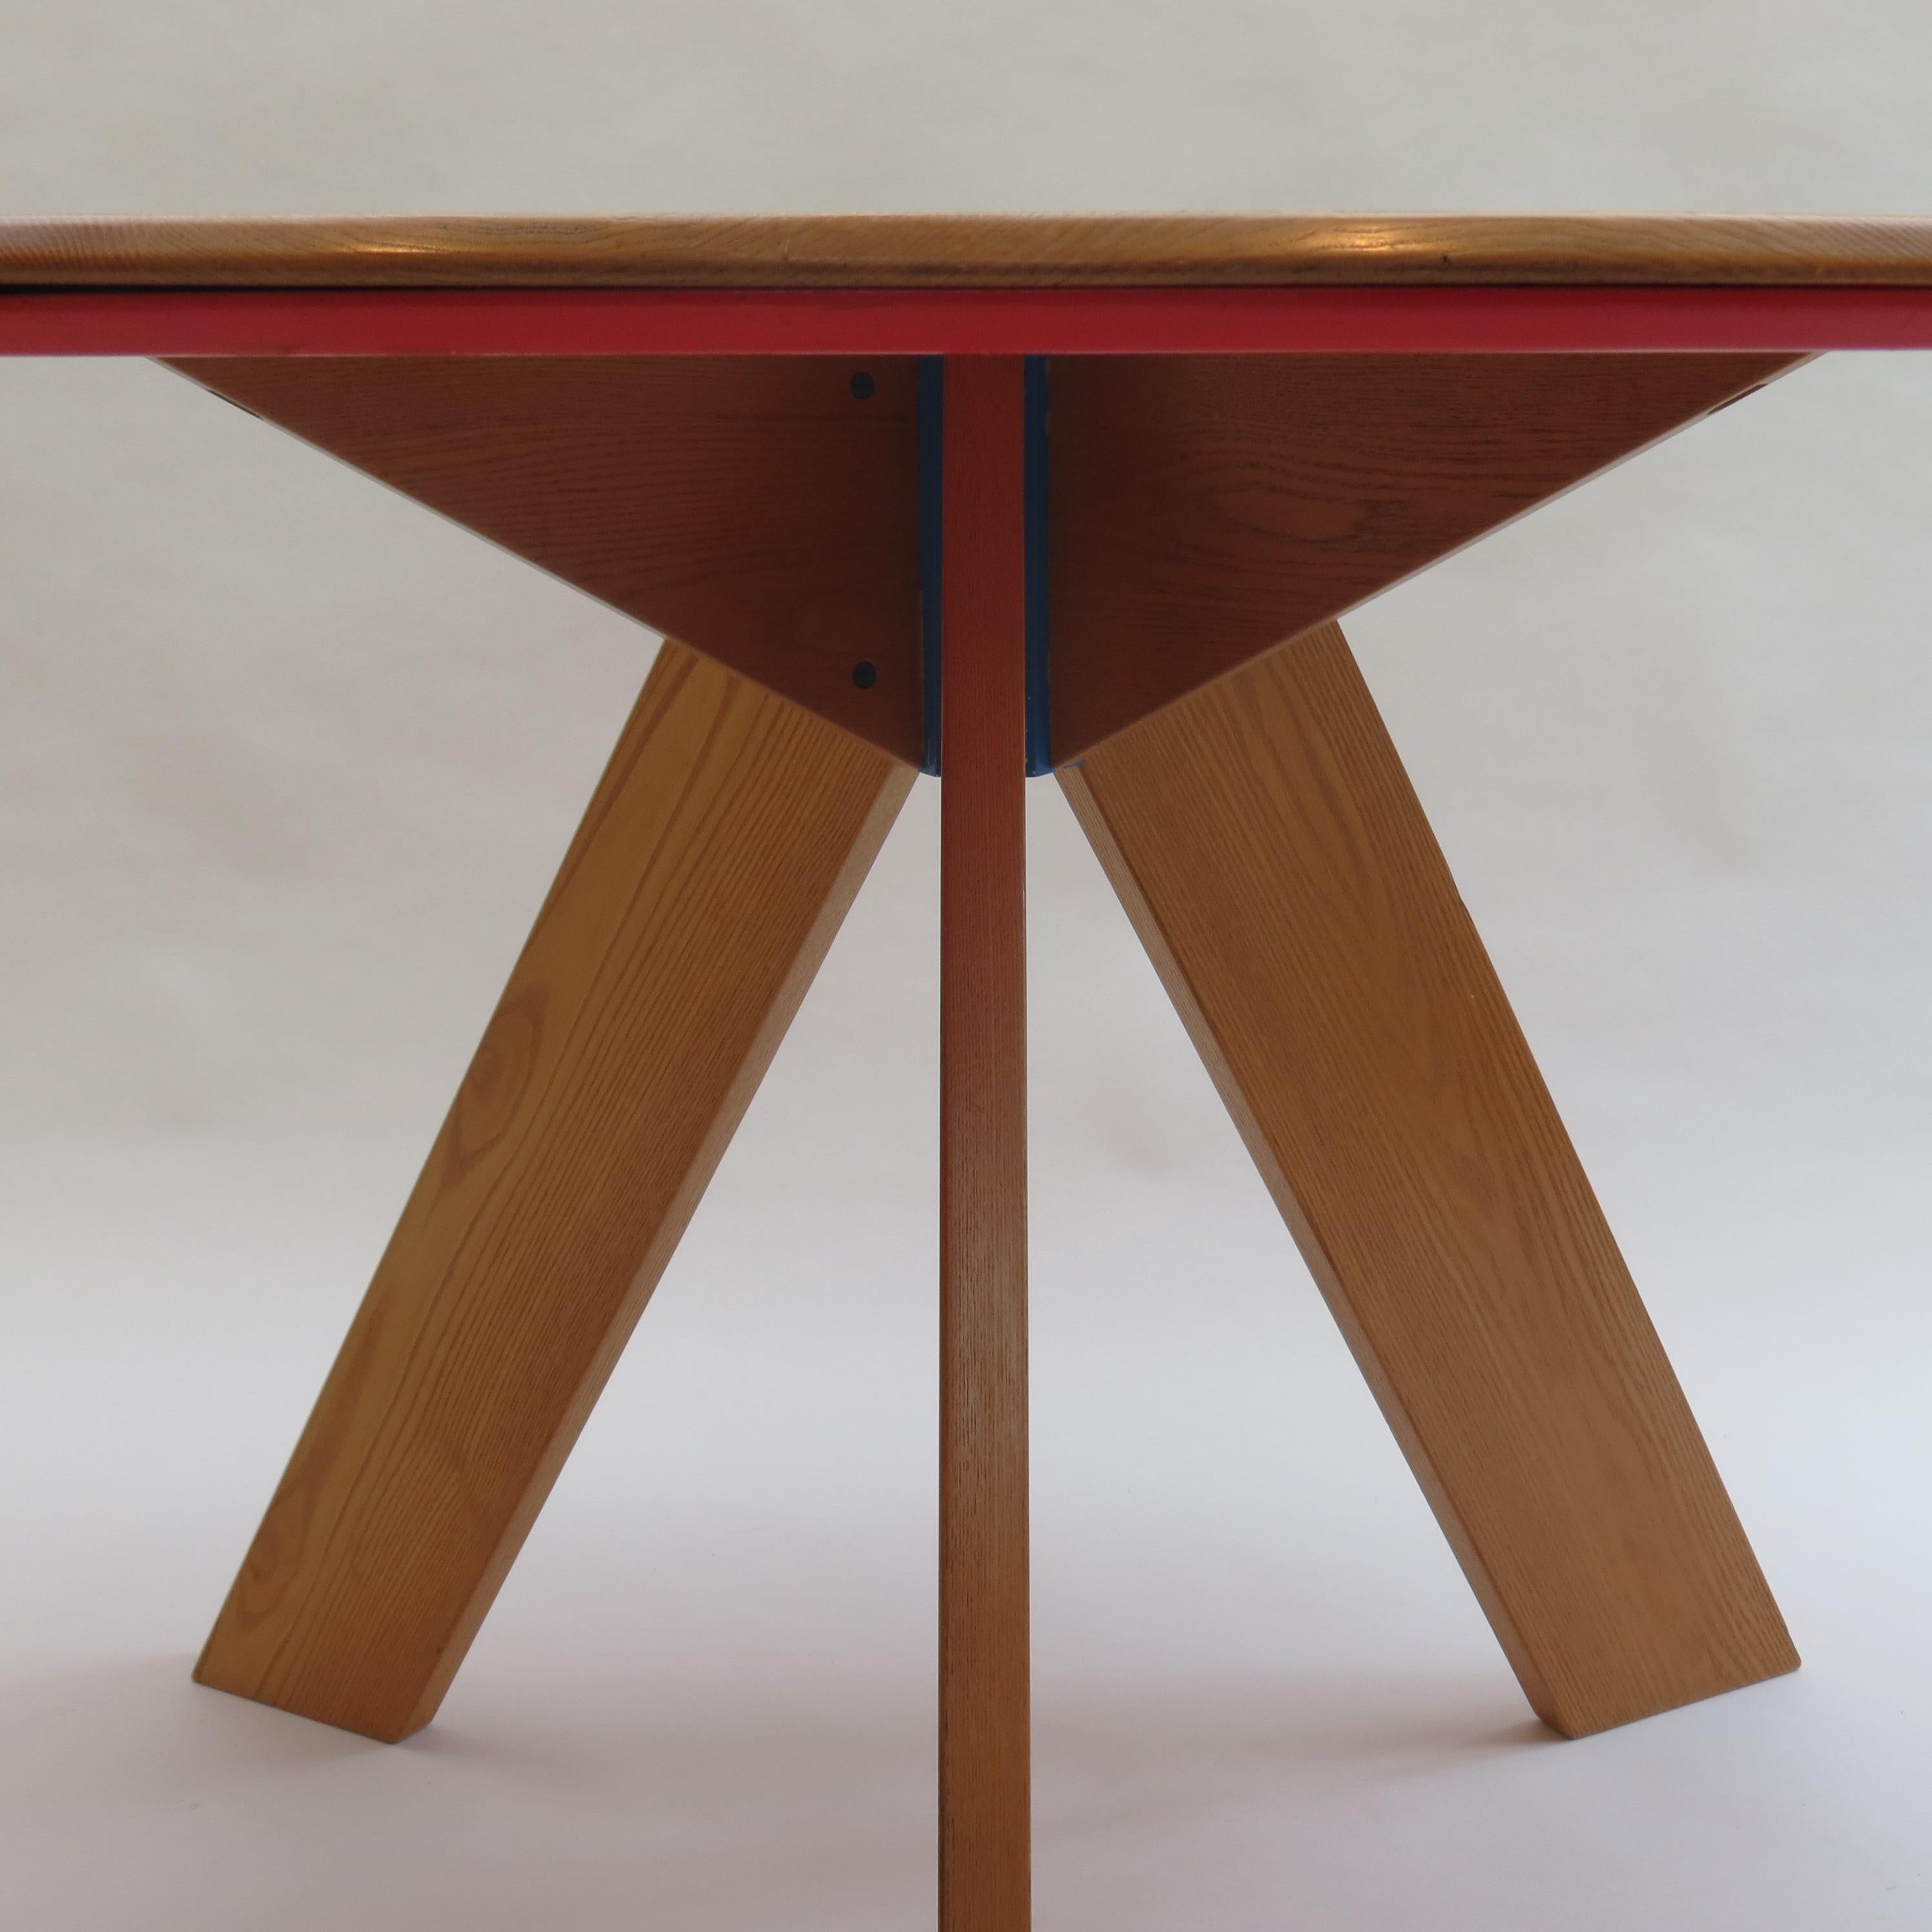 Midcentury Bespoke Round Dining Table by David Field 1980s with Red and Blue Det 1